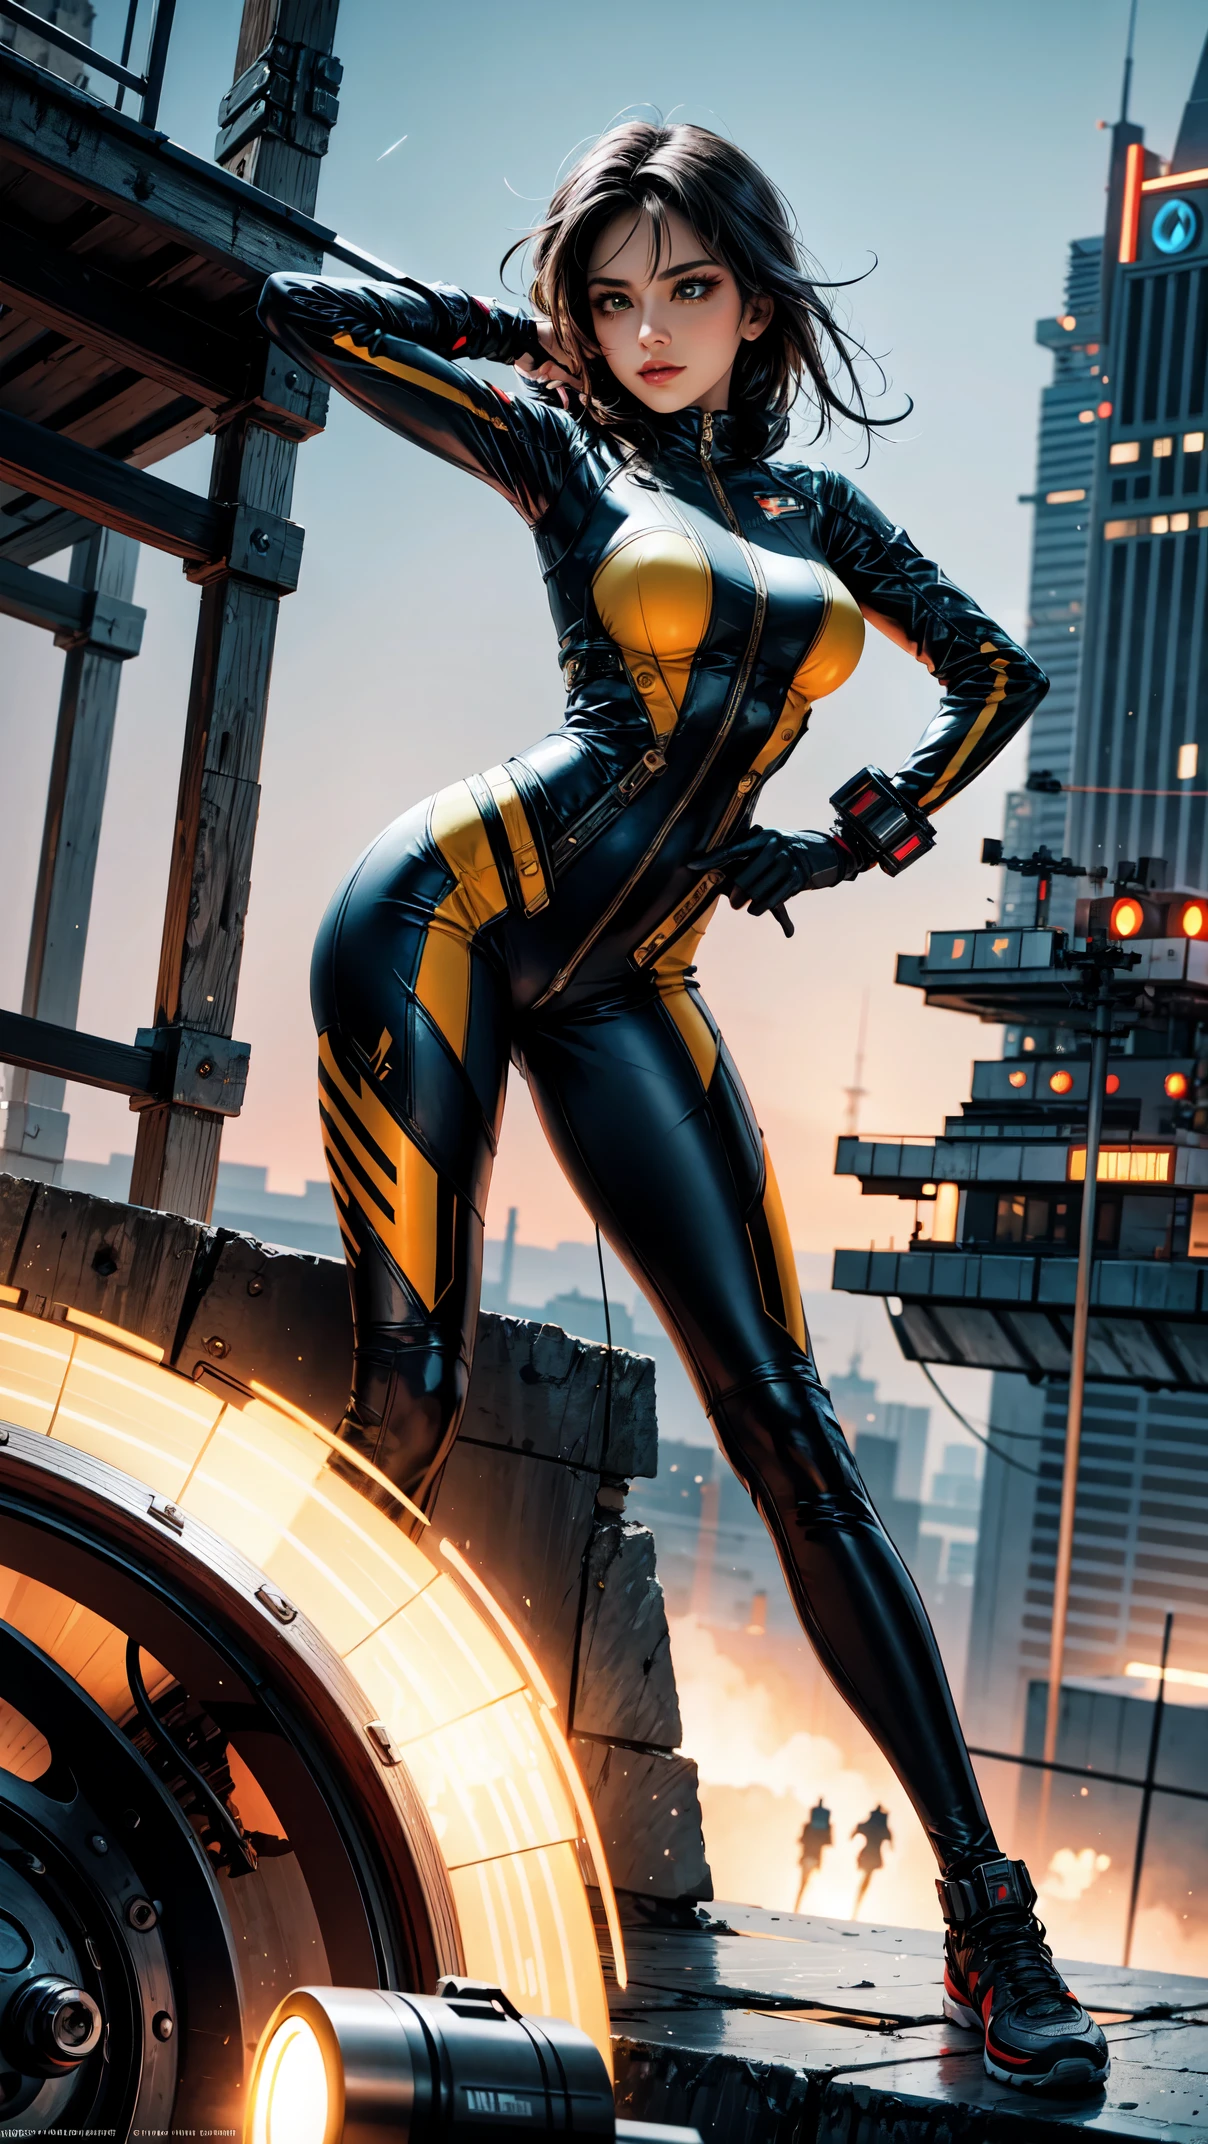 ((Masterpiece in high definition)), retro-futuristic style with steampunk elements. | In this sci-fi_futuristic scenario, a fearless woman advances with confidence through the urban environment. His futuristic jumpsuit, ornamented with pulsating light lines, highlights the harmony between technological aesthetics and his determination in the fight for nature. The cover displays rebellious symbols, emphasizing his role as a leader. The cyber mask enhances your determined eyes as it approaches the imposing energy tower. The metal structure, dominating the horizon, emanates intense light and technological activity, while the woman prepares to challenge the corporation and restore the balance between technology and nature in the floating city. | The composition enhances the determined attitude of the woman, with the cyber mask highlighting her expressive eyes. The intense lighting of the energy tower creates an atmosphere of challenge, highlighting the battle between technological and natural elements. | Futuristic scene of a fearless woman challenging a corporation in a floating city, highlighting the harmony between technological aesthetics and the struggle for nature. | {The camera is positioned very close to her, revealing her entire body as she adopts a dynamic_pose, interacting with and leaning on a structure in the scene in an exciting way} | ((perfect_pose):1), She is adopting a ((dynamic_pose as interacts, boldly leaning on a structure, leaning back in a dynamic way):1.3), ((full body)), ((hands_with_5_fingers):1), ((perfect_fingers):1), ((perfect_legs):1), better_hands, More_Detail.